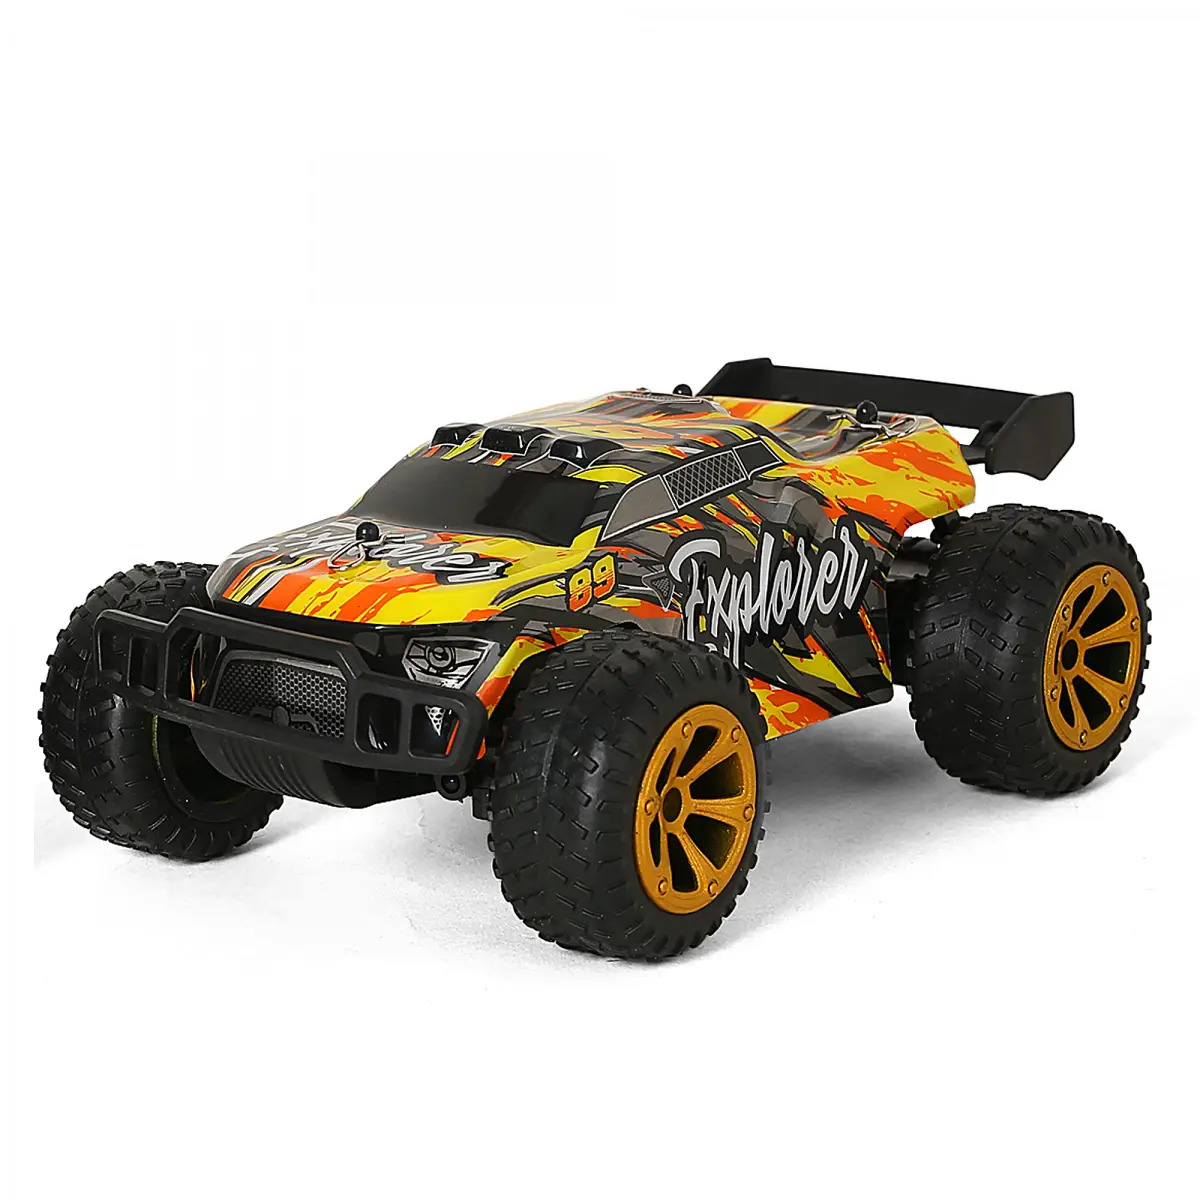 Sirius Toys Dune Drifter High Speed Off Roader, Remote Control Toys, 6Y+, Multicolour